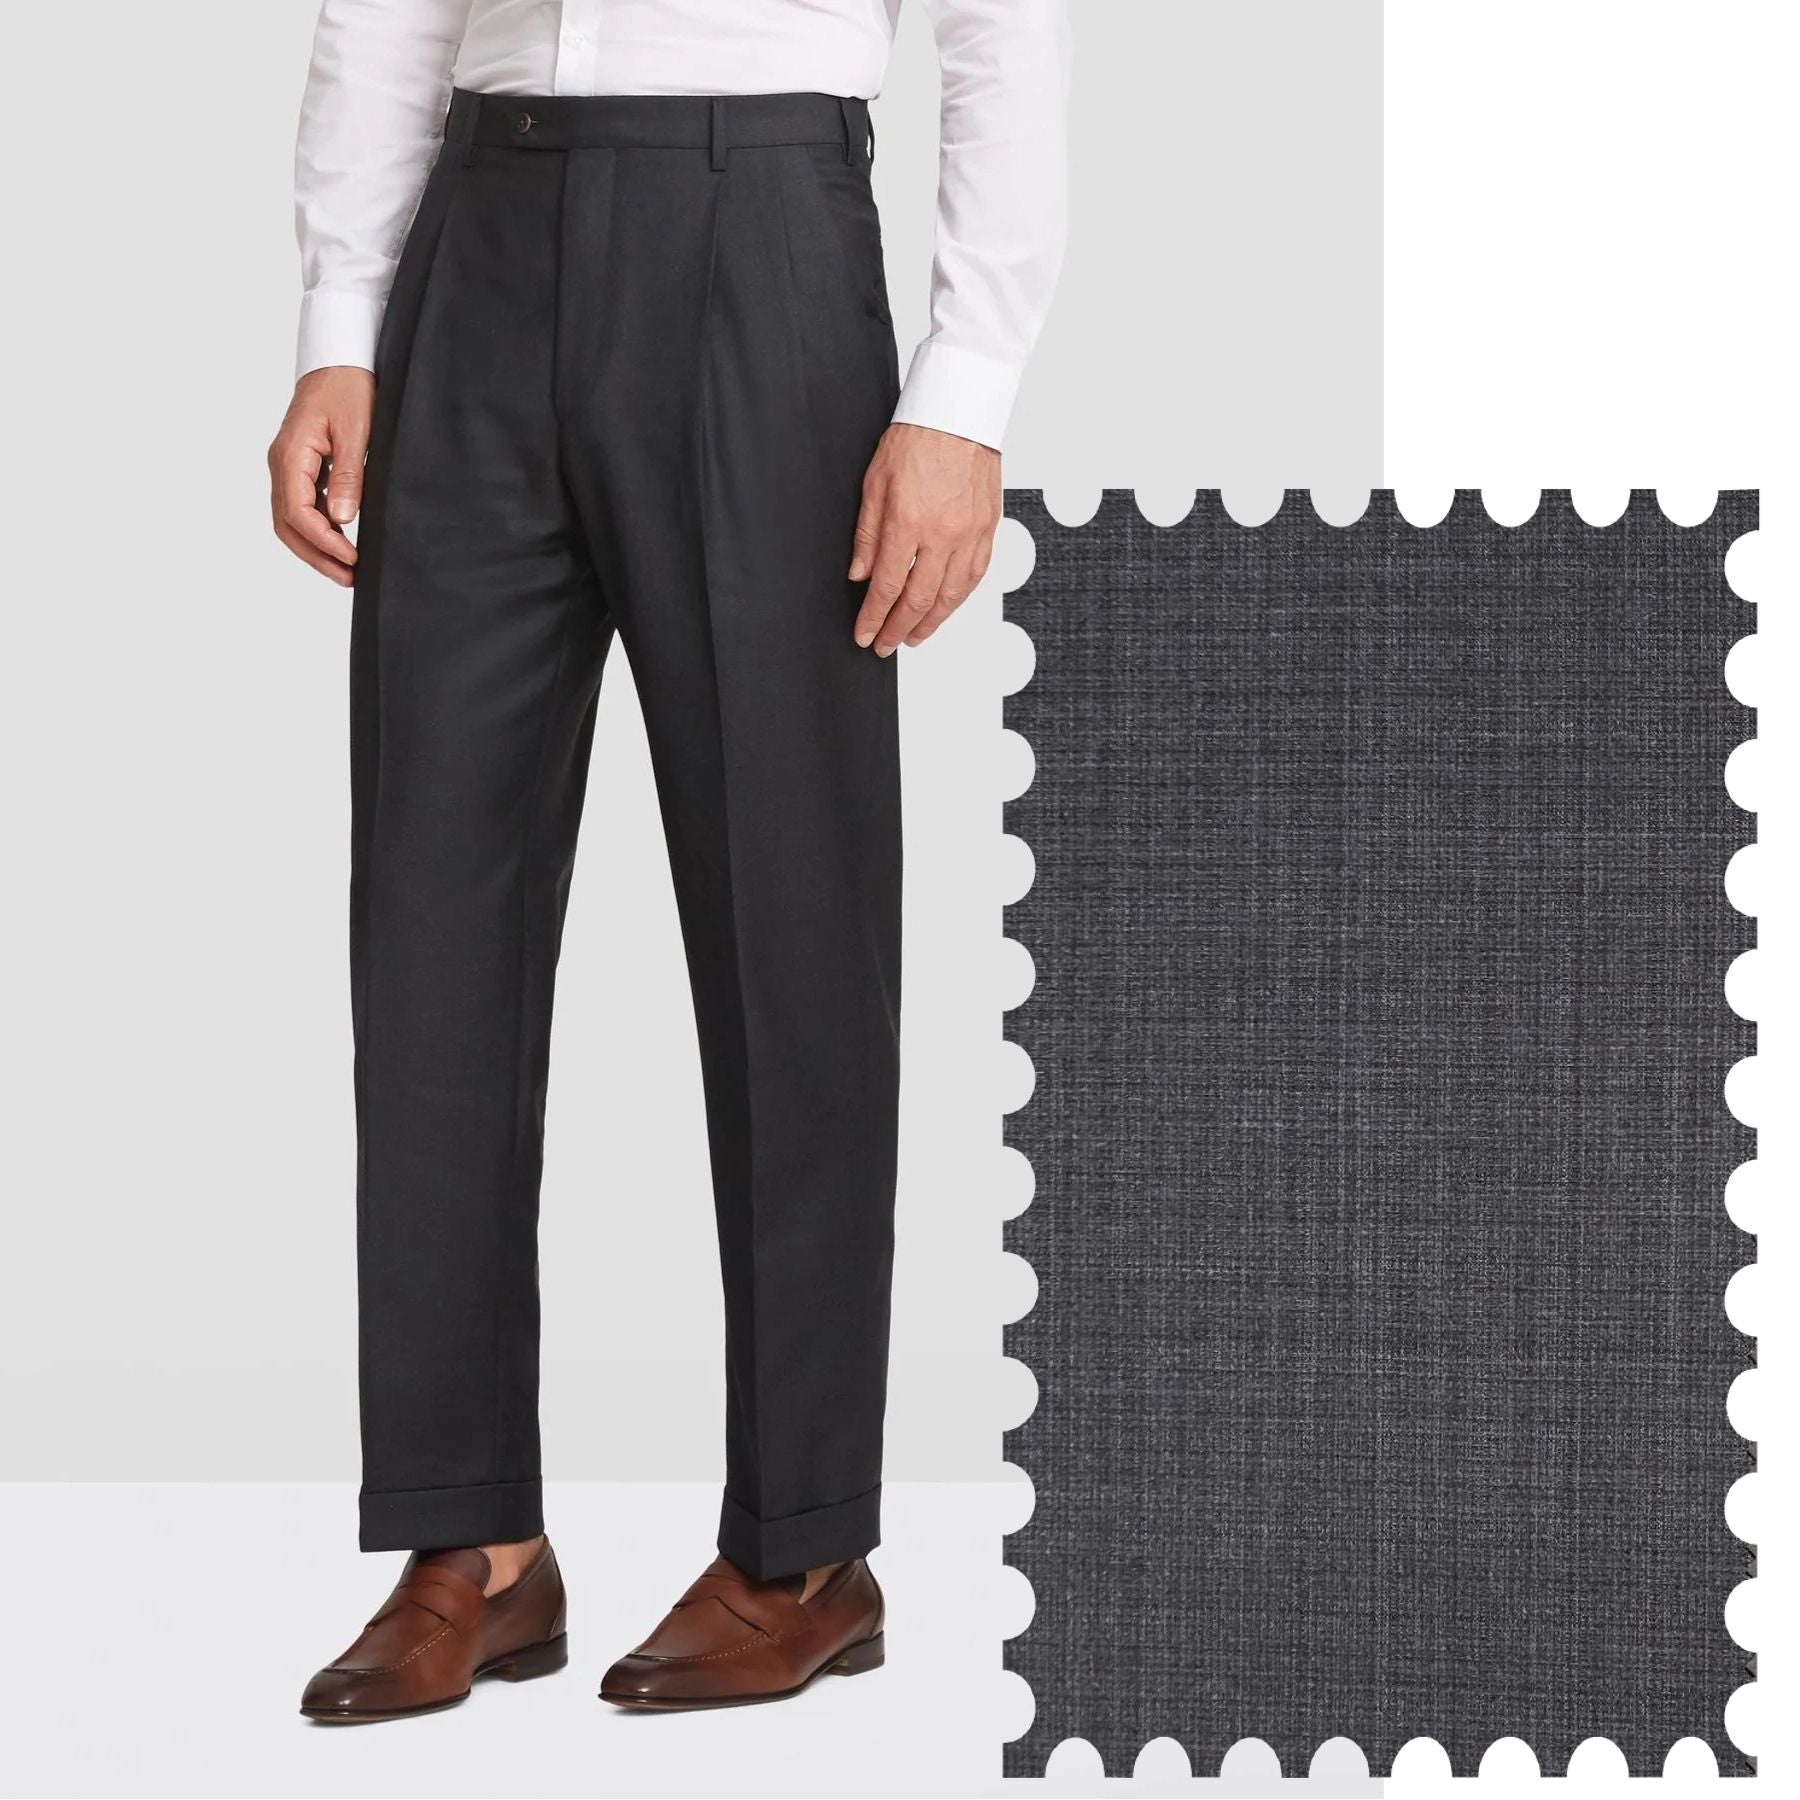 Sojanya (Since 1958) Men's Cotton Blend Charcoal Grey Solid Formal Trousers